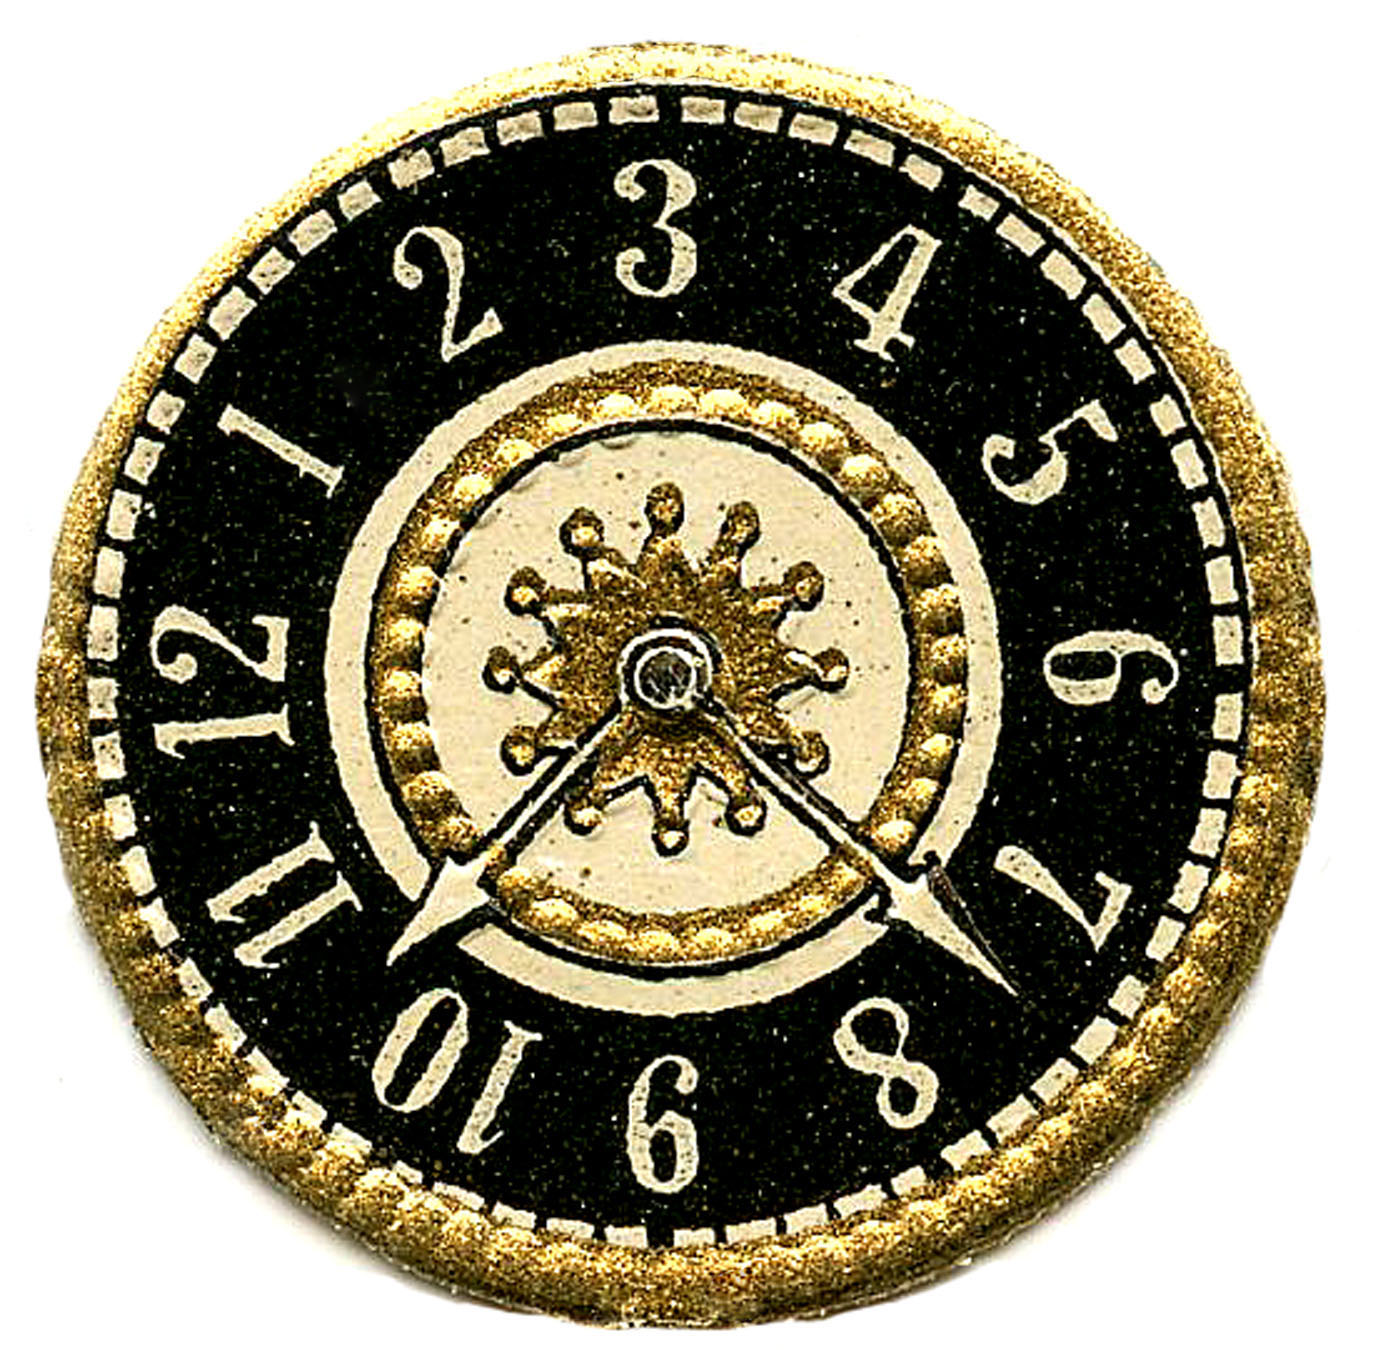 free clipart images clock face - photo #11